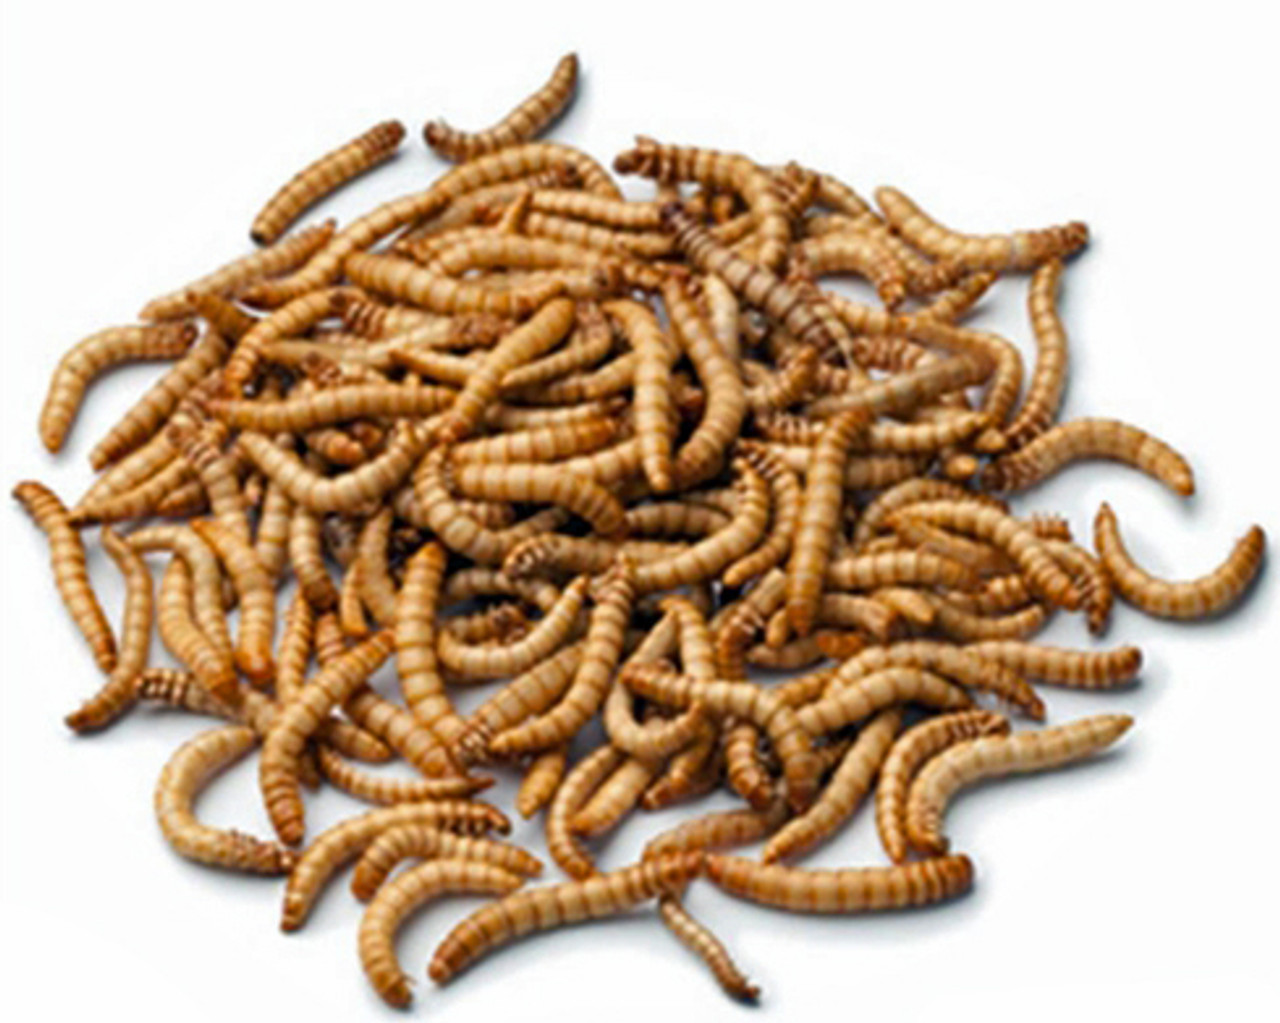 Drifting Giant Mealworms for Fishing - Rainbow Mealworms